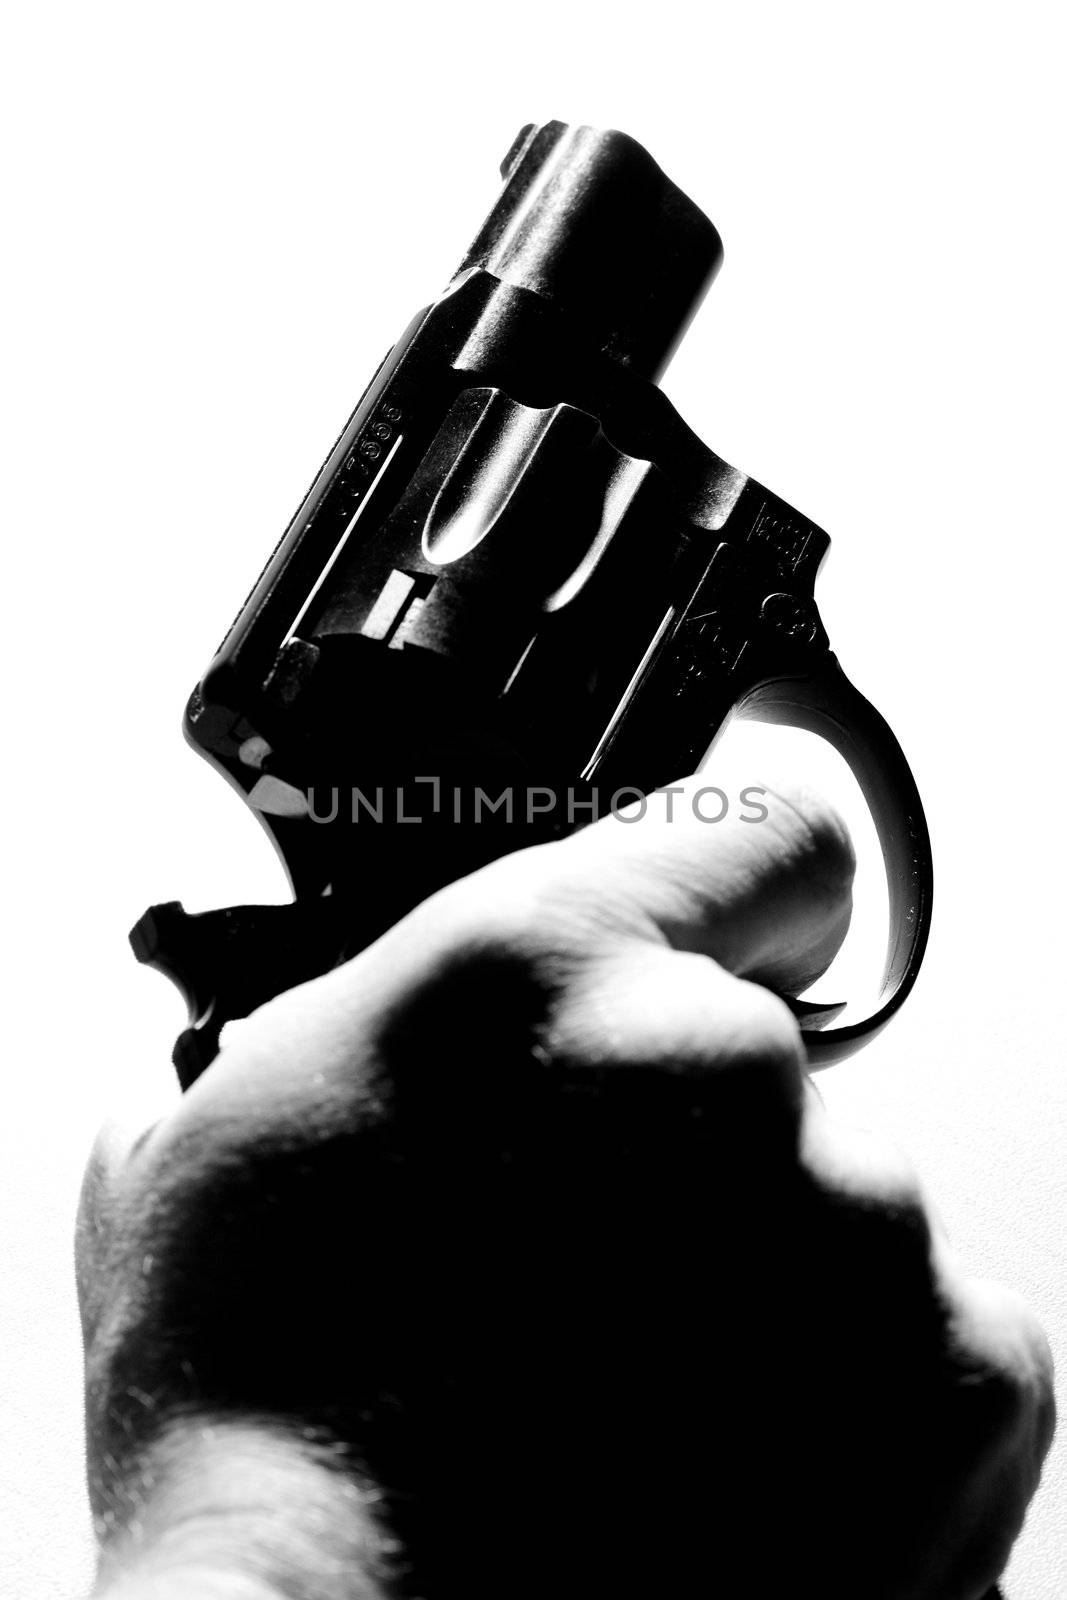 gun in the hand, black and white